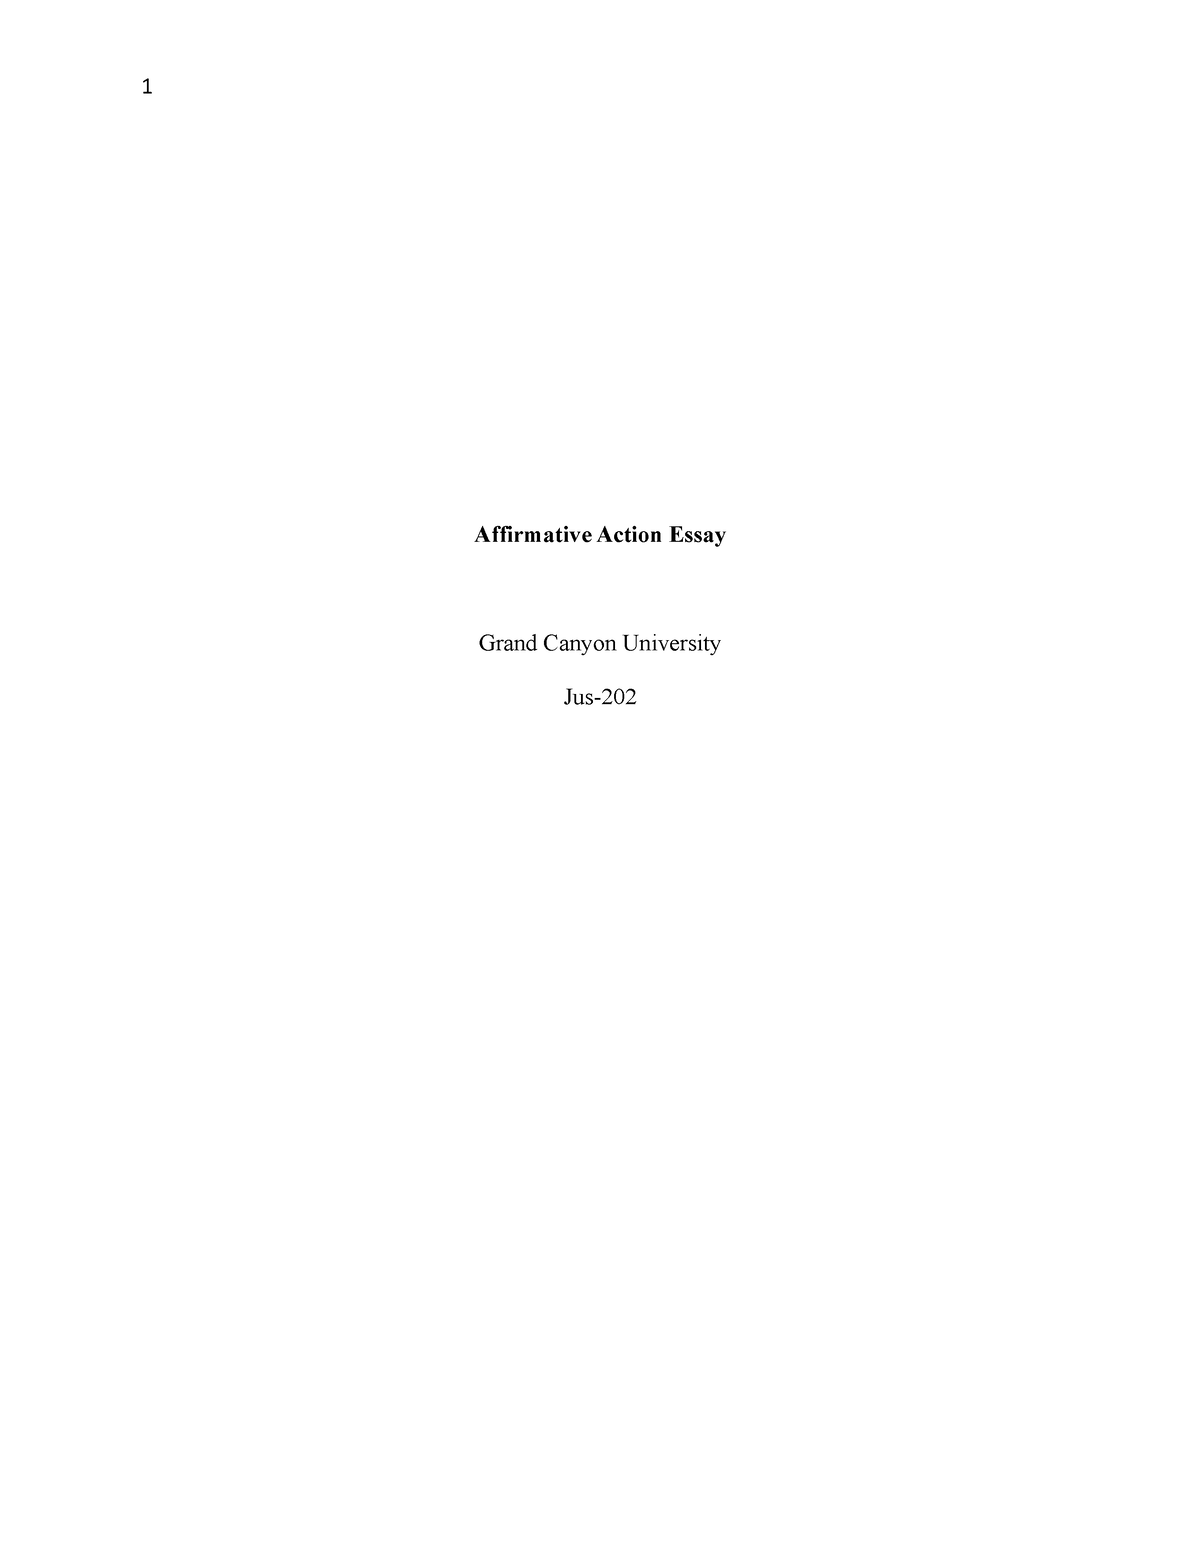 affirmative action title for essay